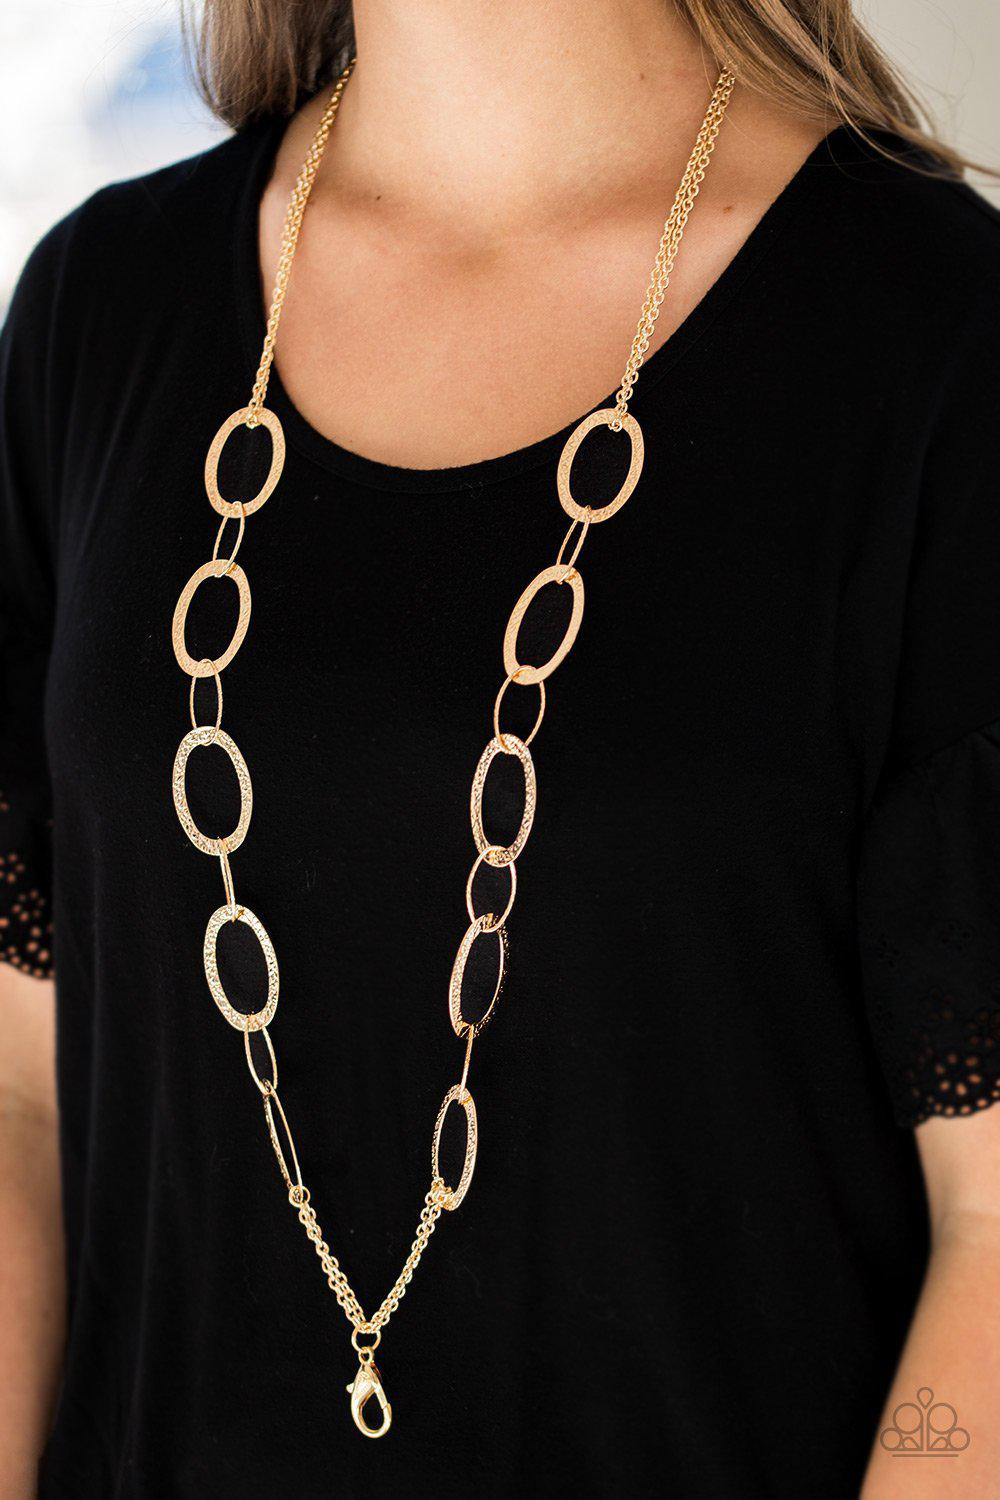 Glimmer Goals Gold Lanyard Necklace - Paparazzi Accessories-CarasShop.com - $5 Jewelry by Cara Jewels